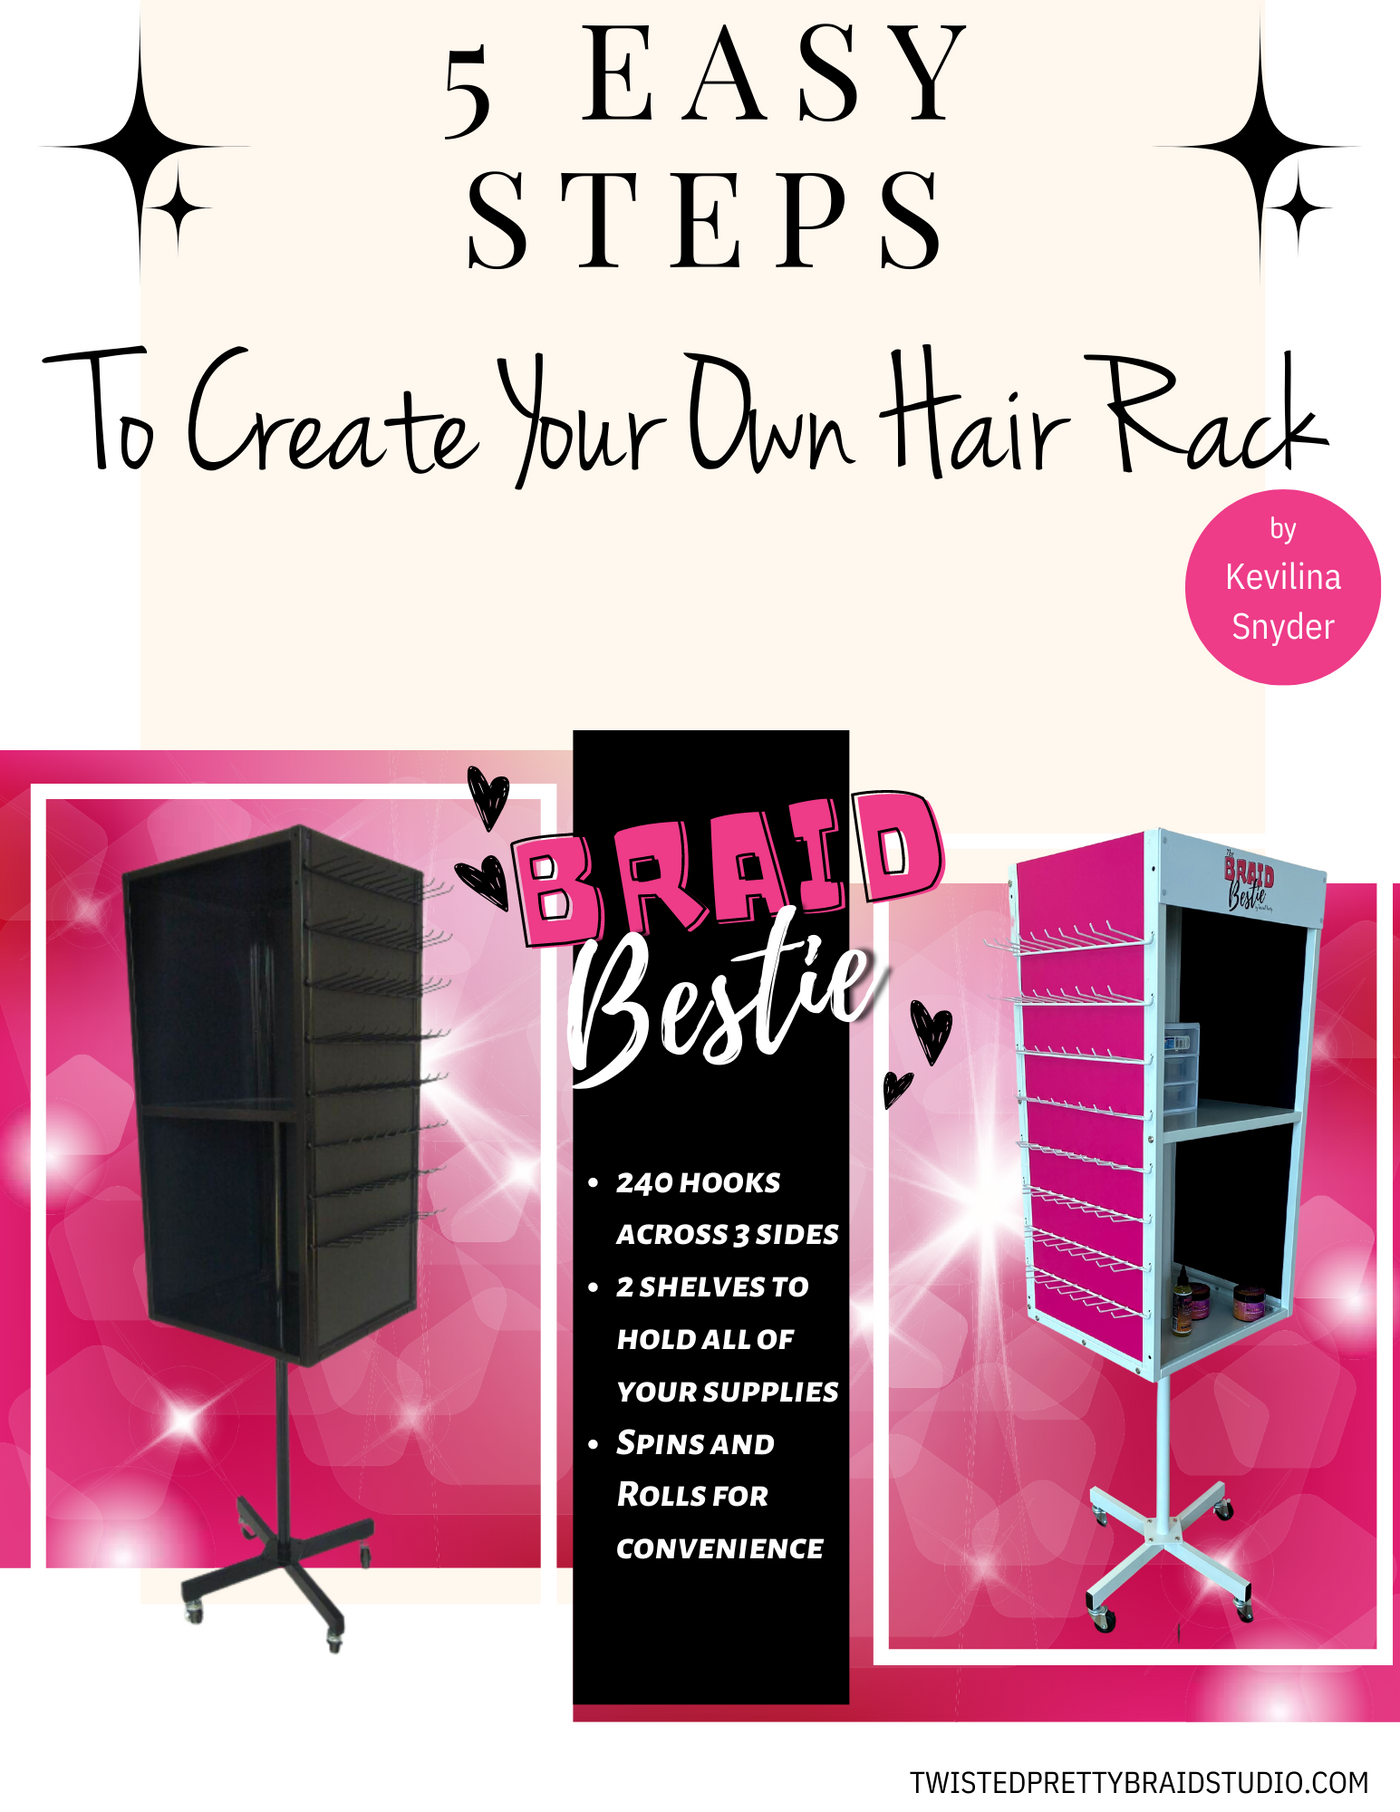 E-Book: 5 Easy Steps to Create Your Own Hair Rack- Braid Bestie Vendor INCLUDED!